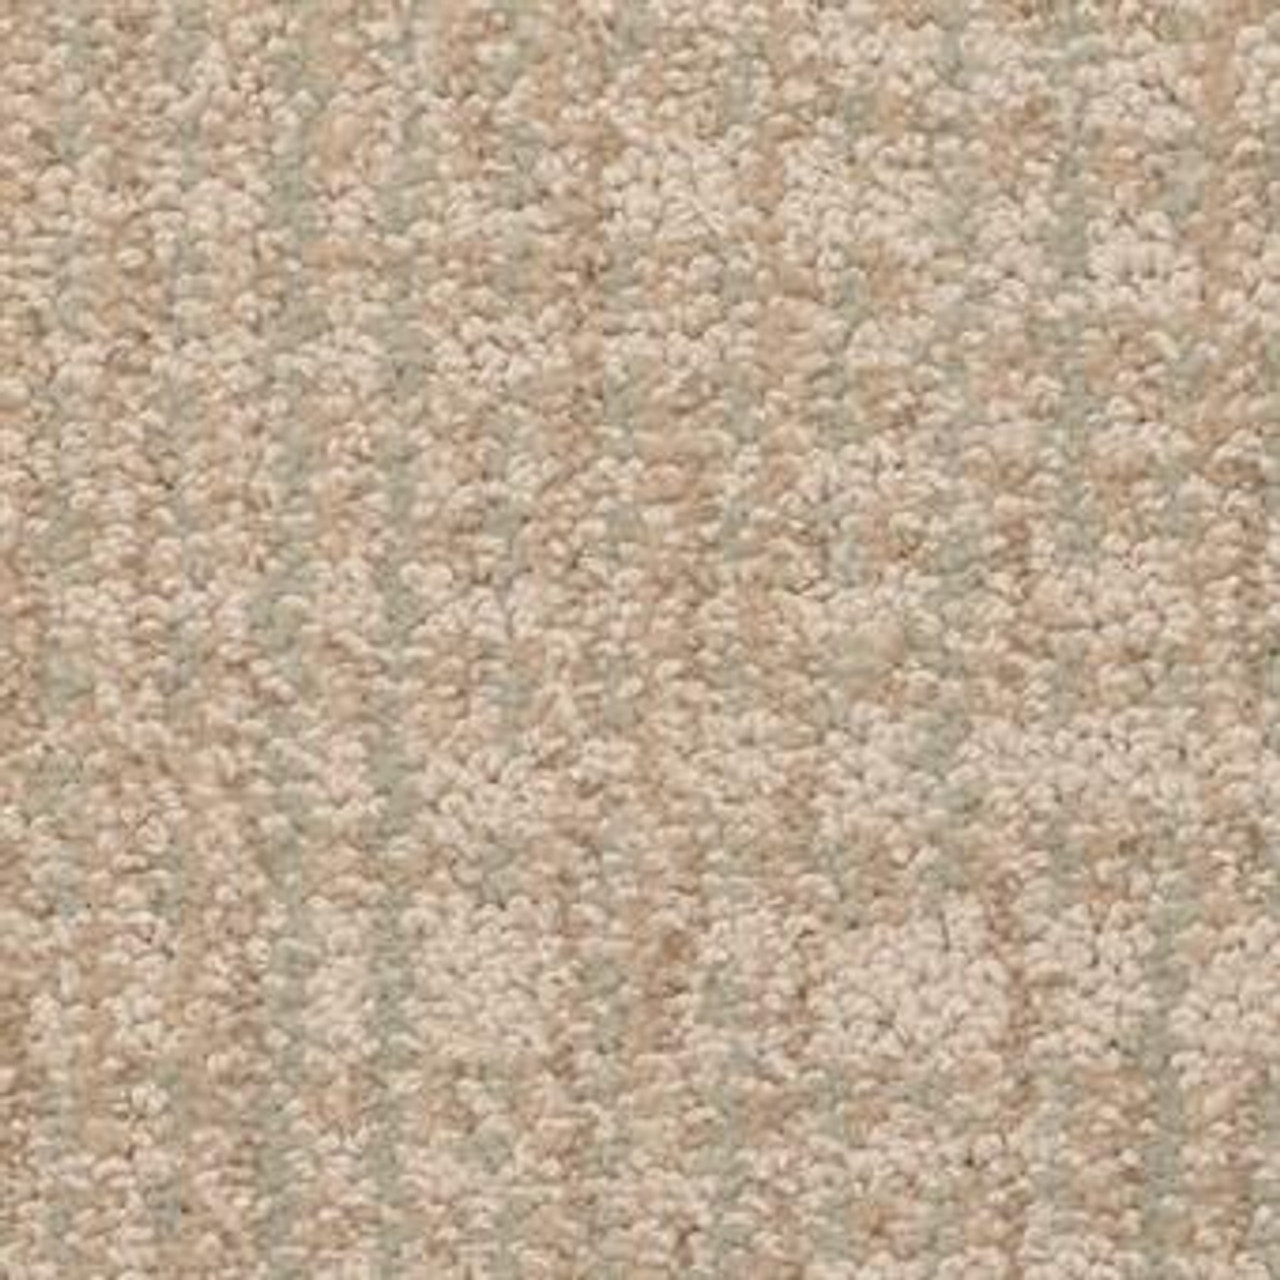 Buying Carpet Remnants: Pros, Cons, and Warranty Coverage